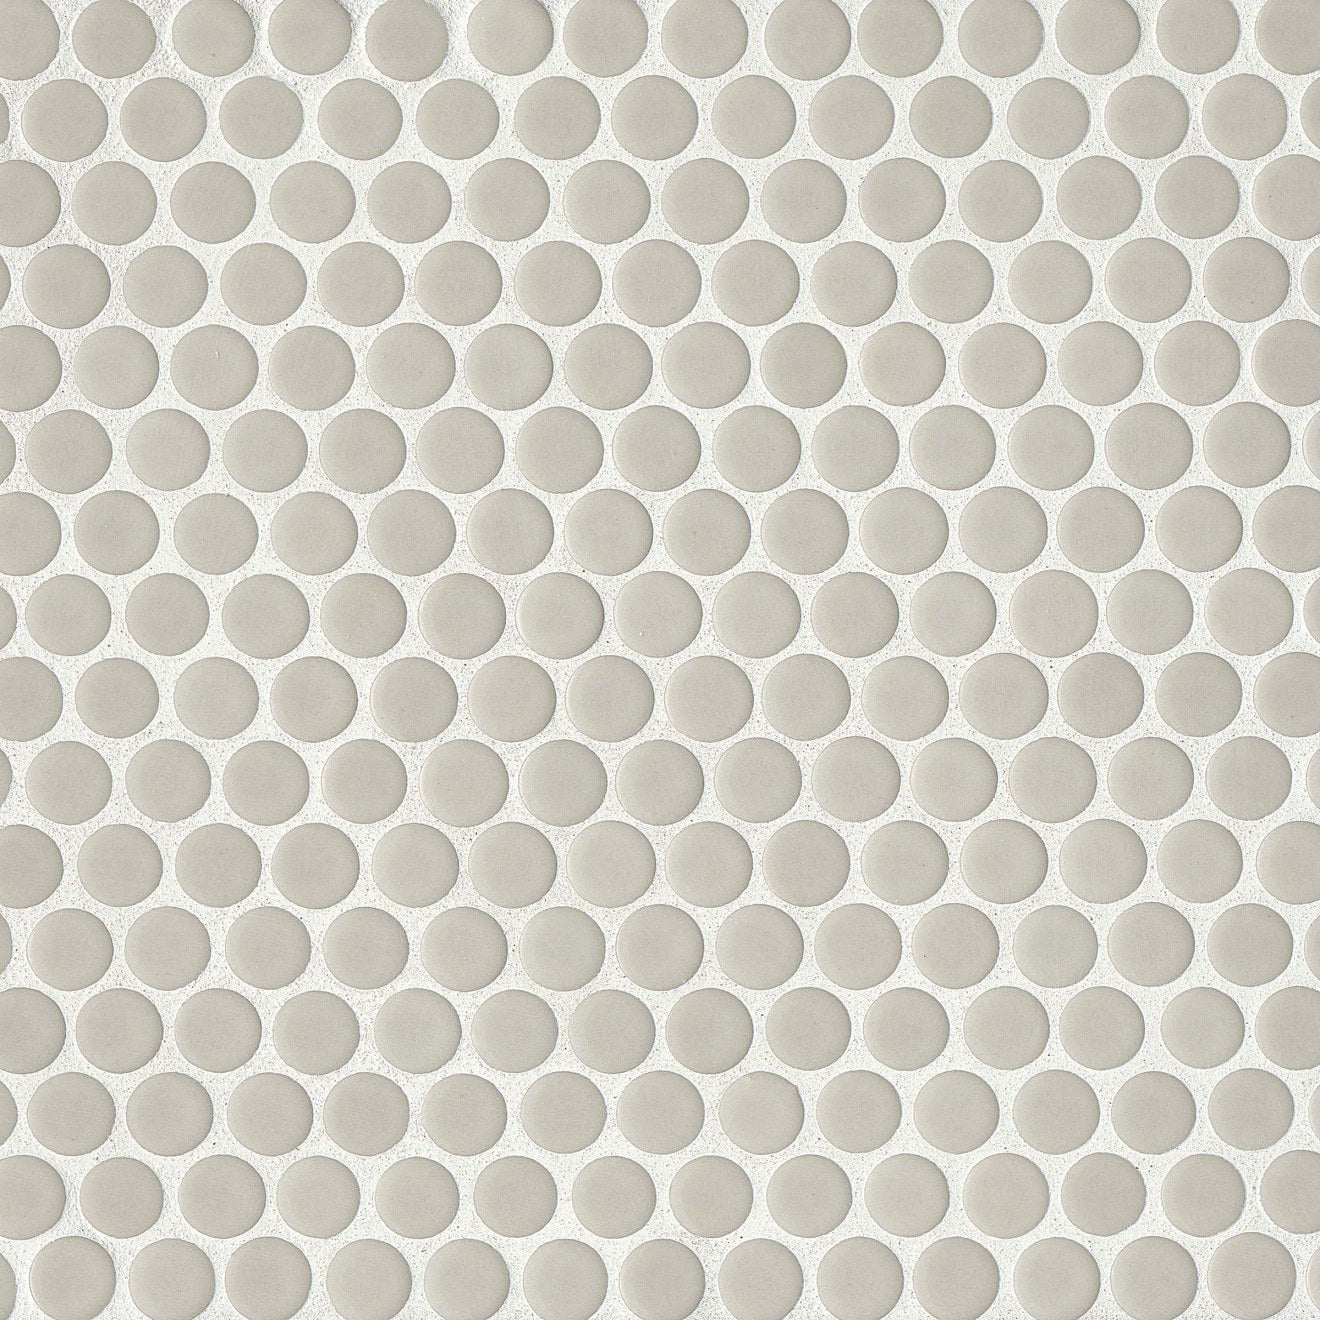 Bedrosians 360 3/4" Penny Rounds Mosaic - Gloss 12"x12" Off White